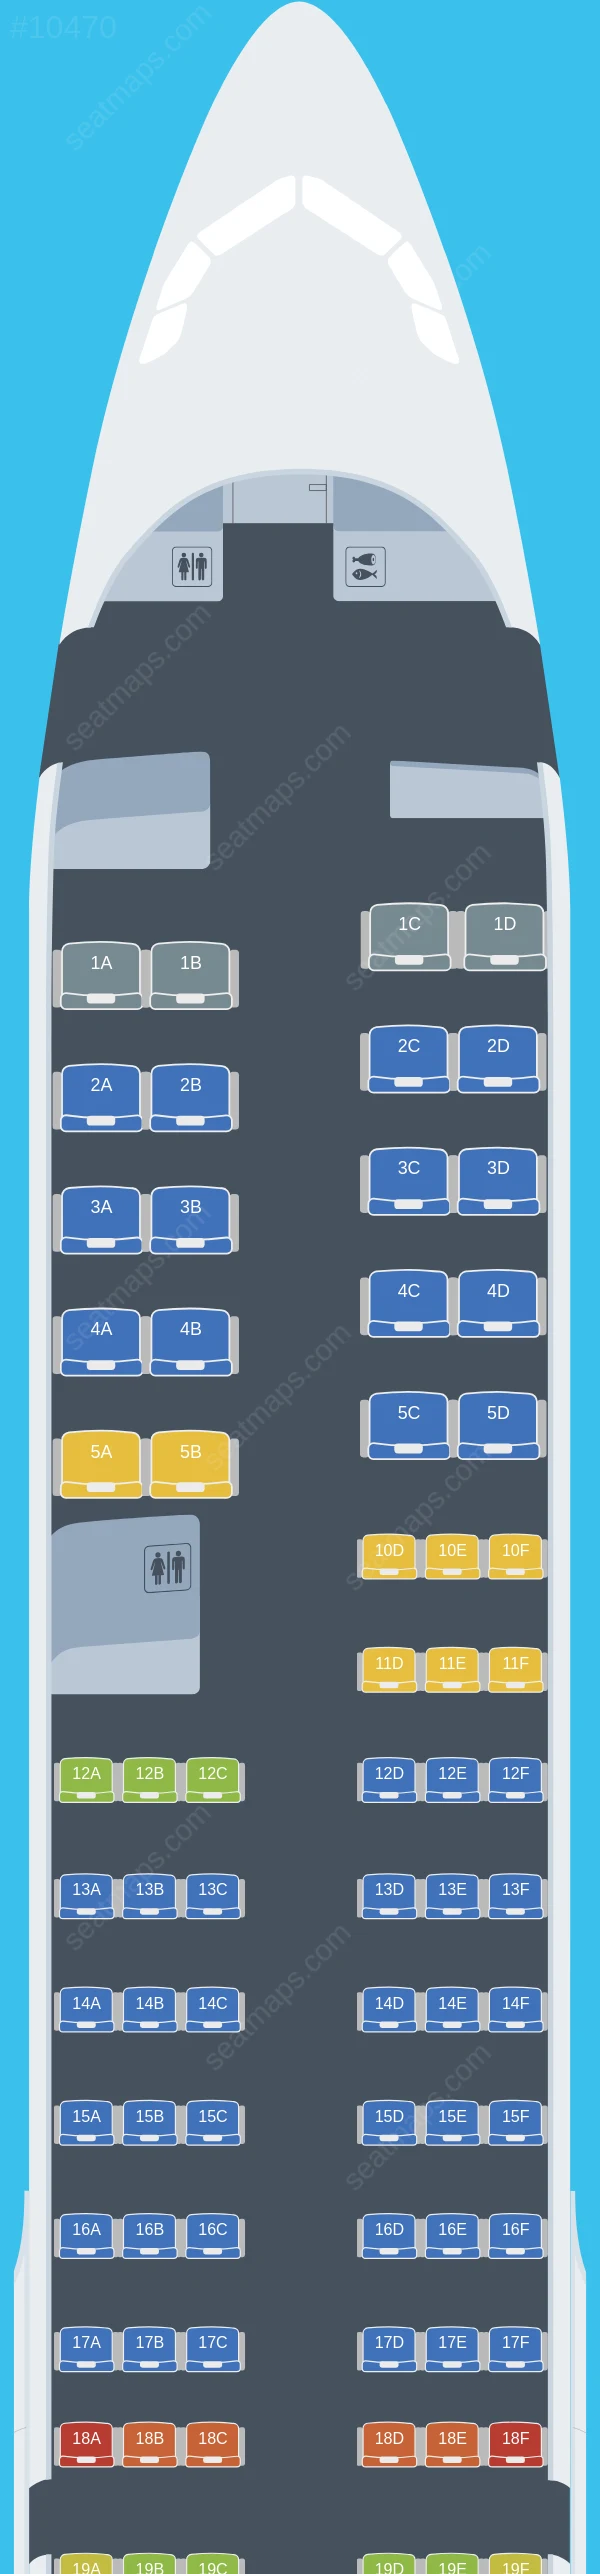 Delta Airbus A321neo V.1 seatmap preview